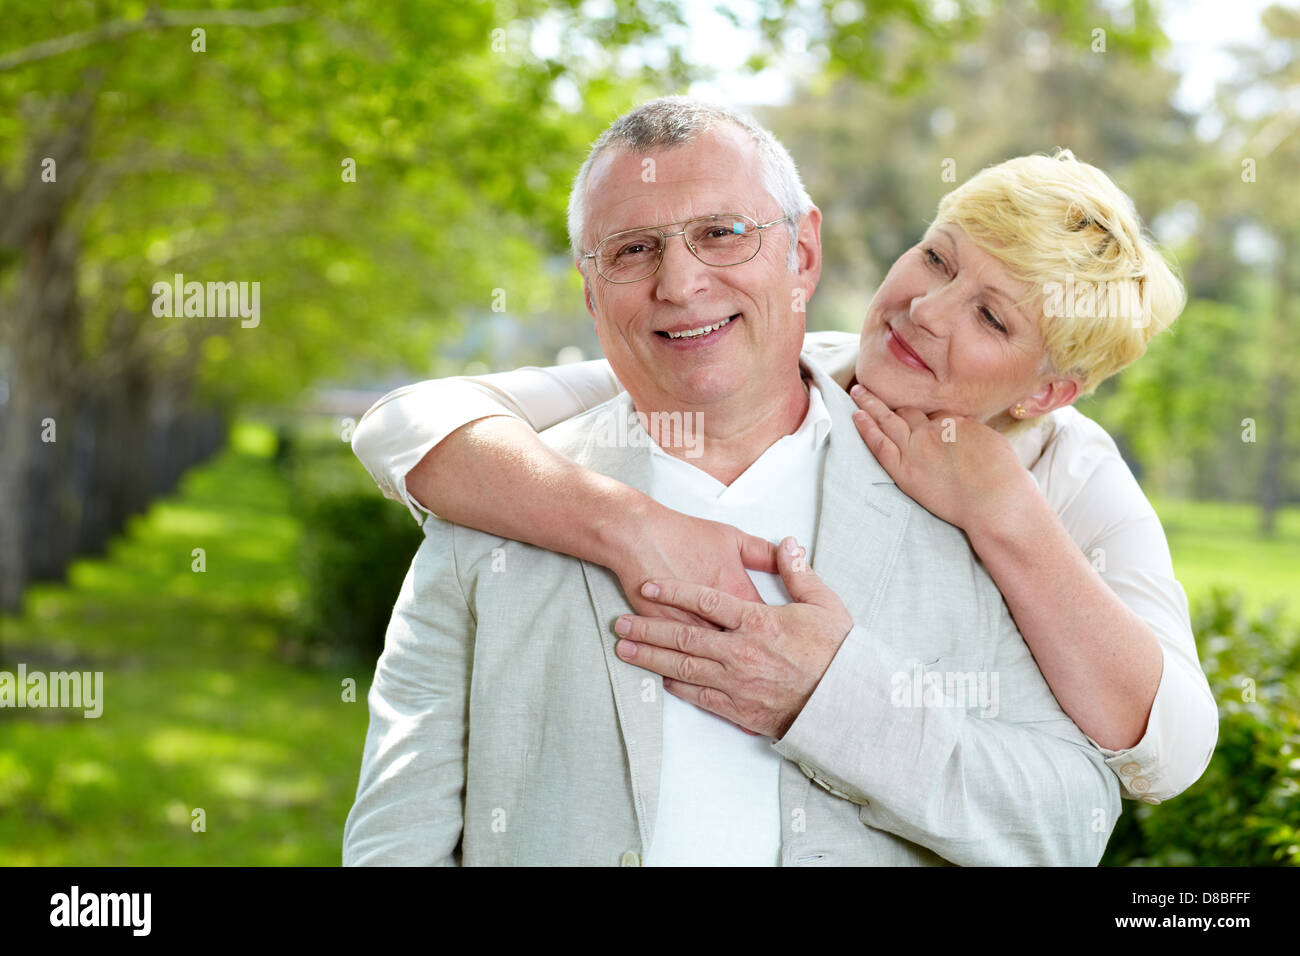 Portrait of happy mature woman hugging her husband outside Stock Photo